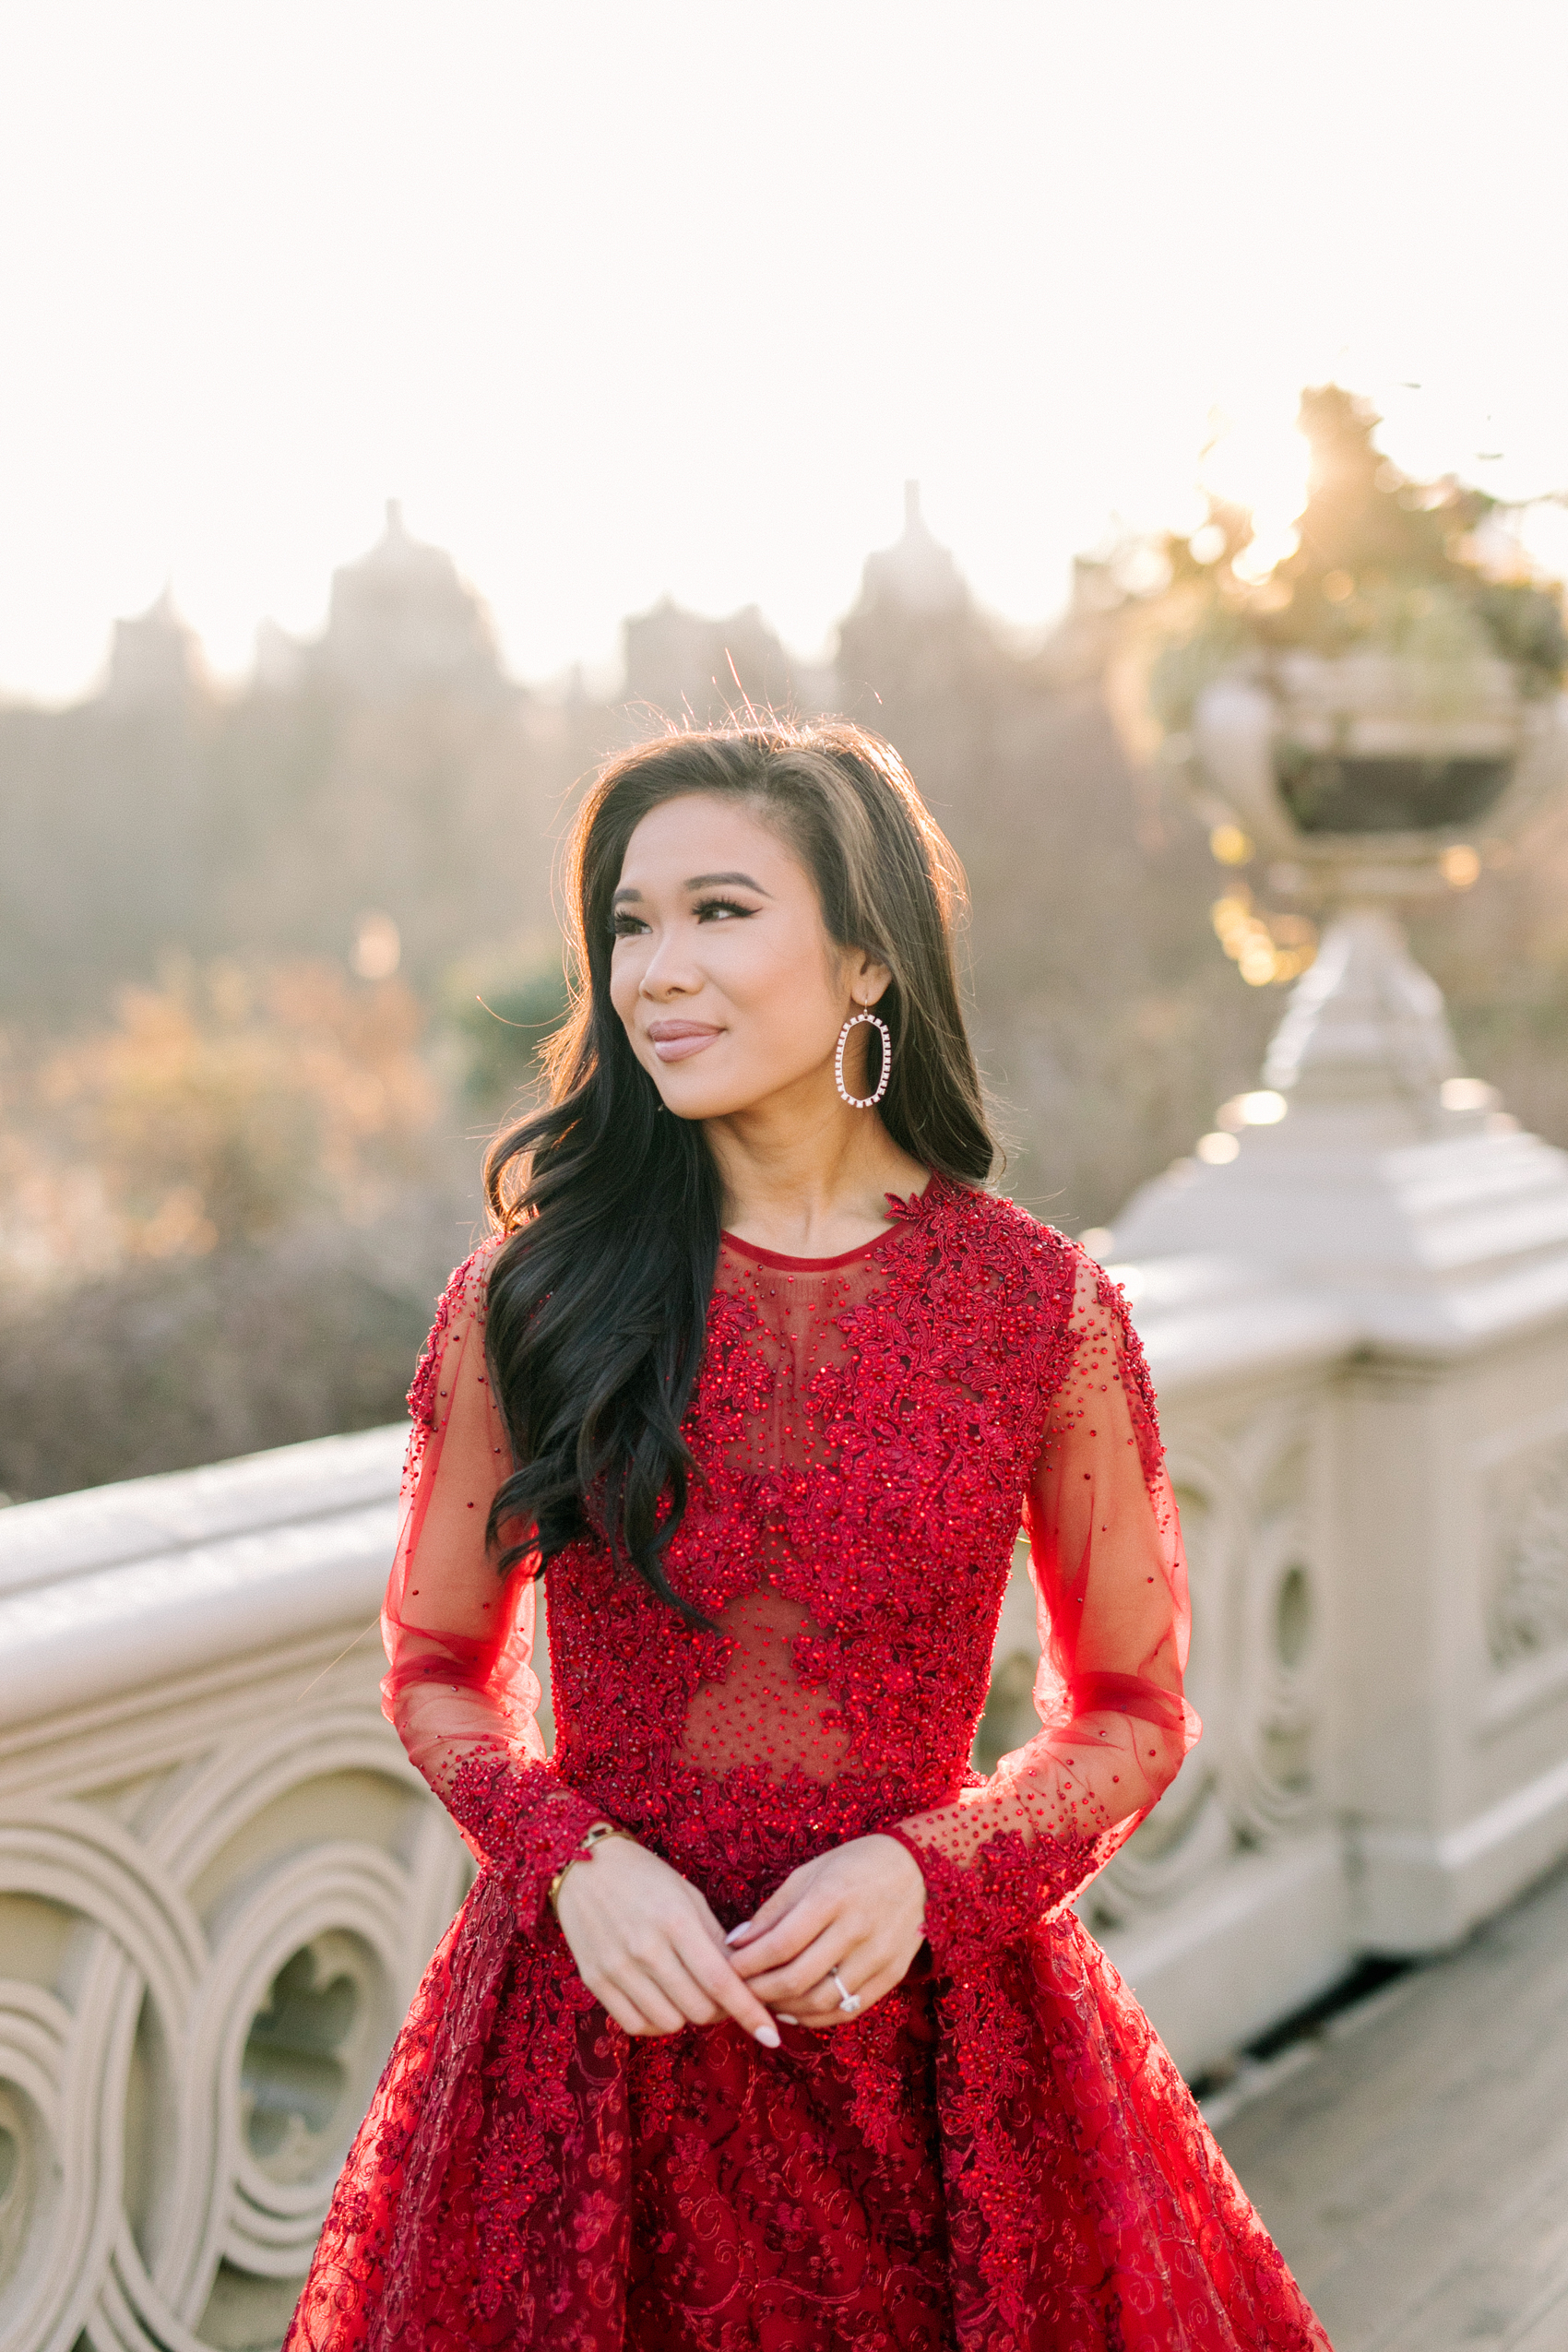 Hoang-Kim Cung wearing a MacDuggal long sleeve illusion lace ballgown, James Allen cushion diamond engagement ring and Kendra Scott Danielle open frame earrings for Central Park engagement photos